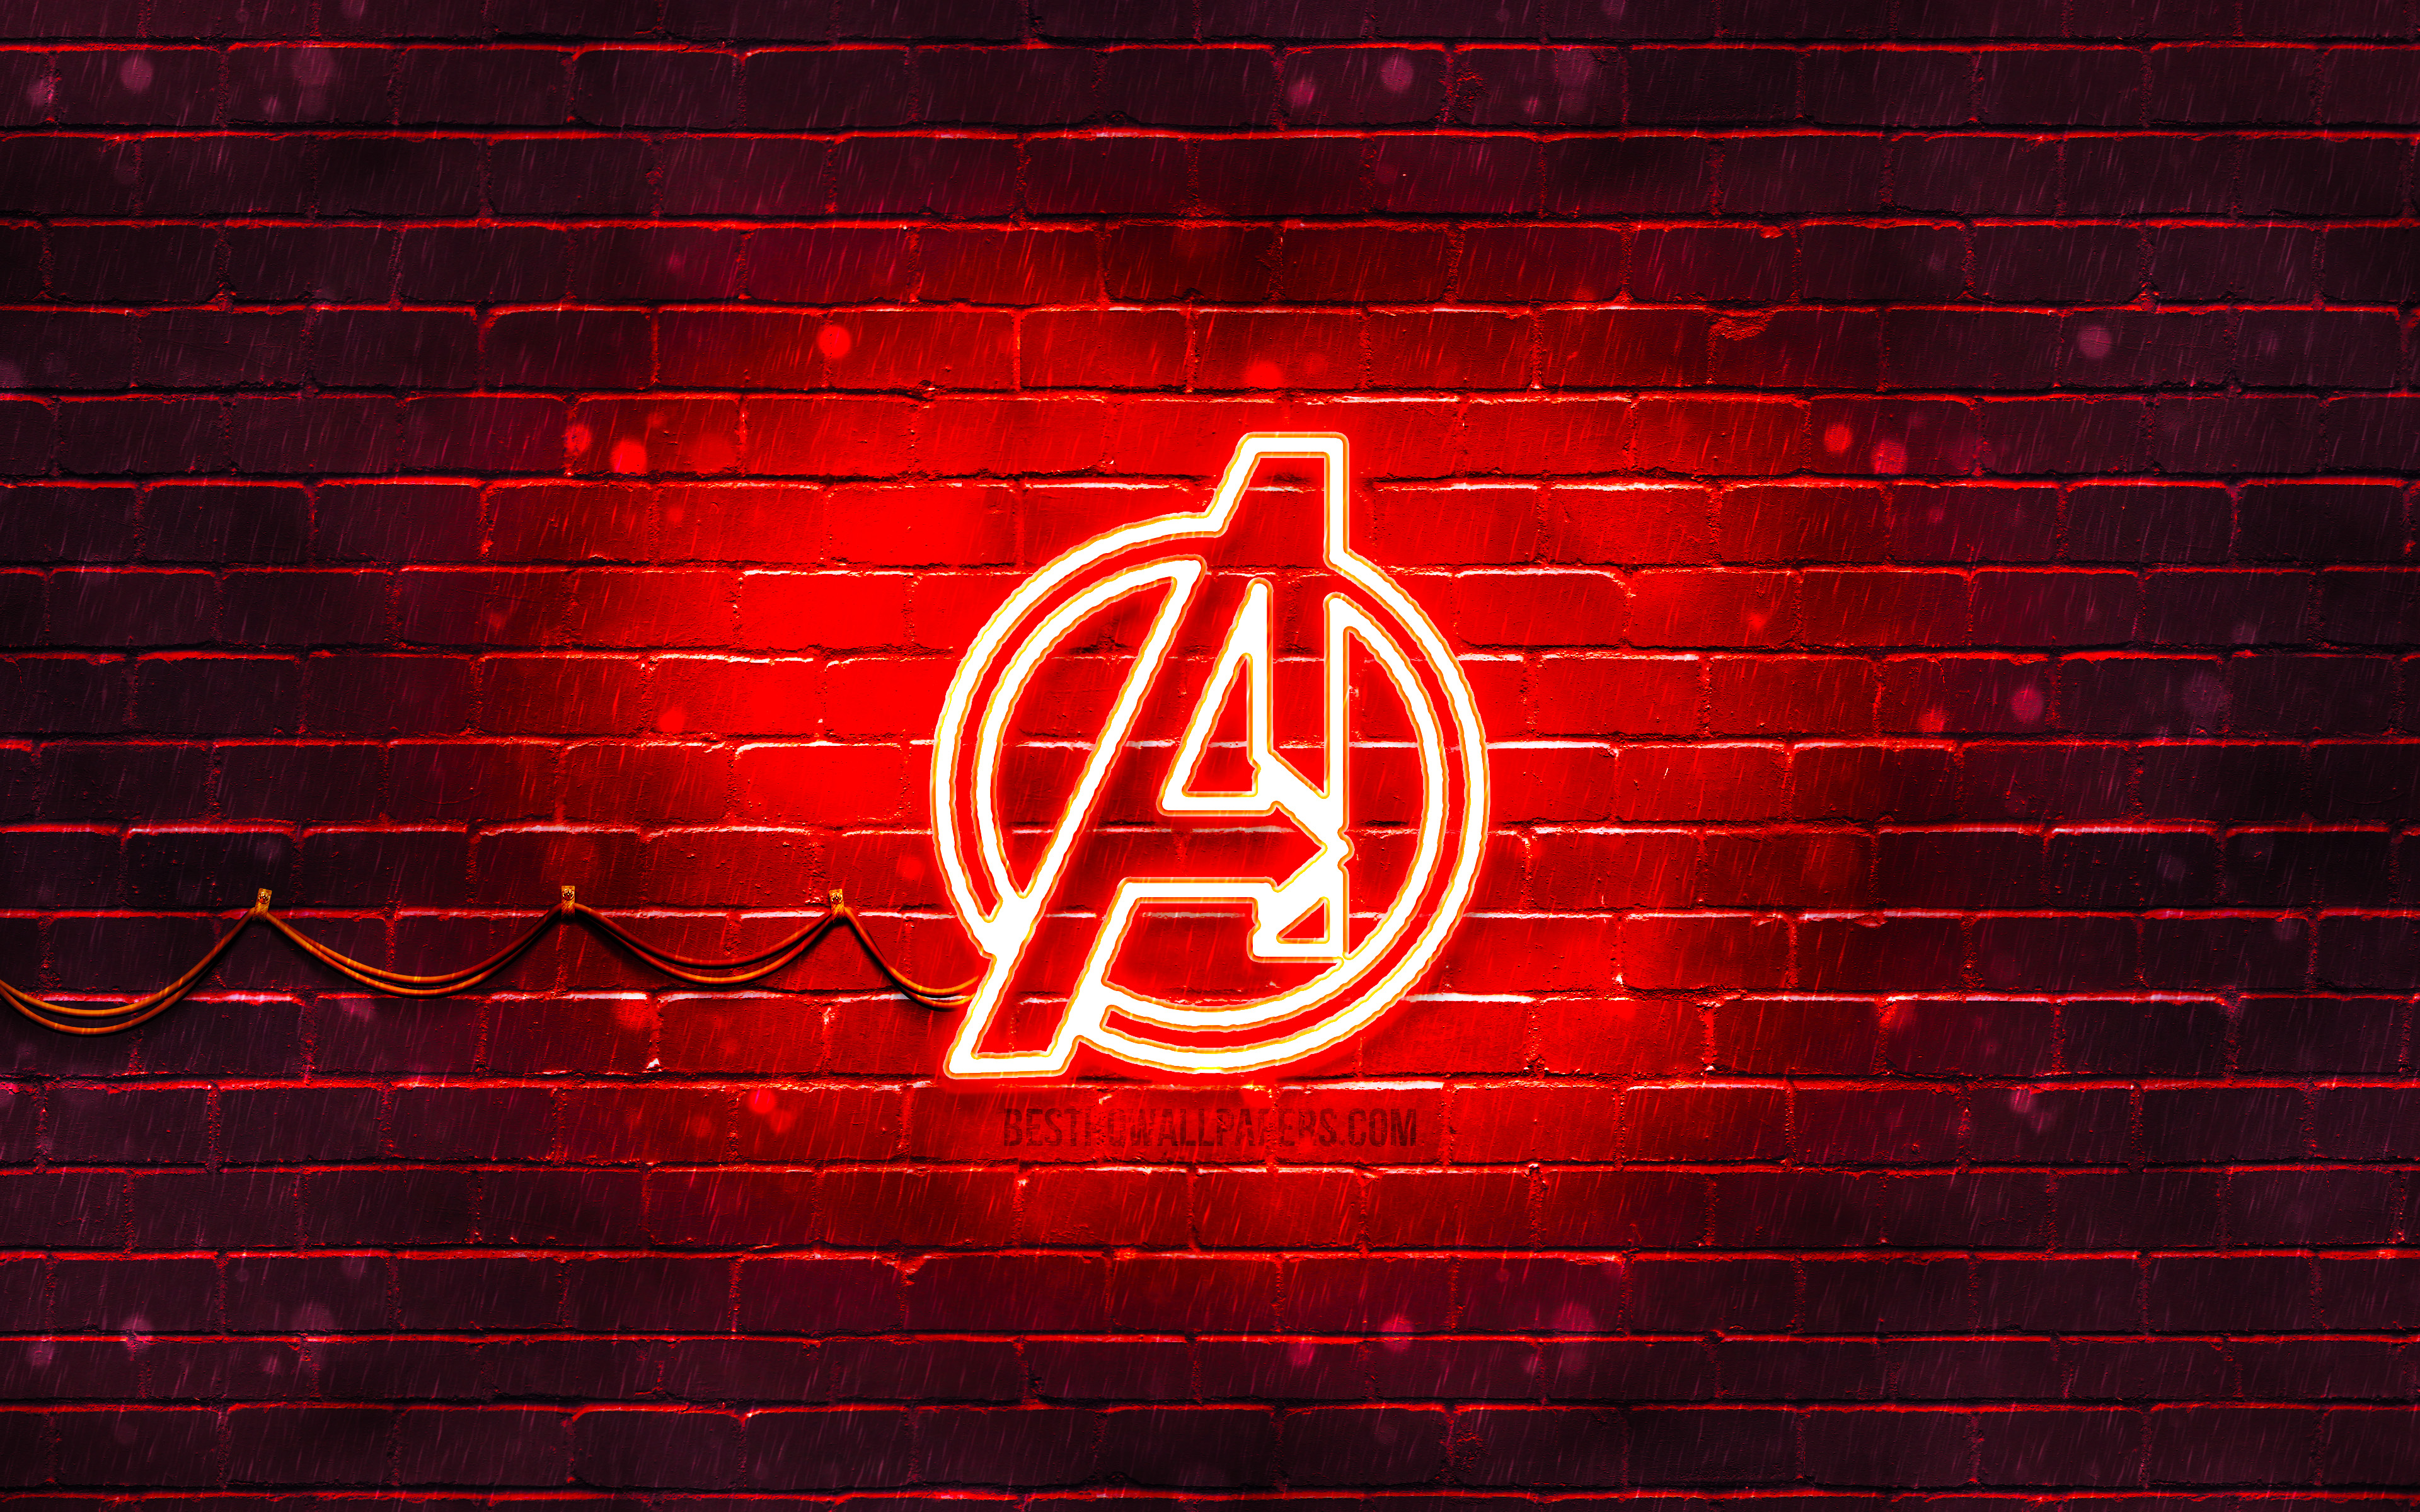 Download wallpapers Avengers red logo, 4k, red brickwall, Avengers logo, su...